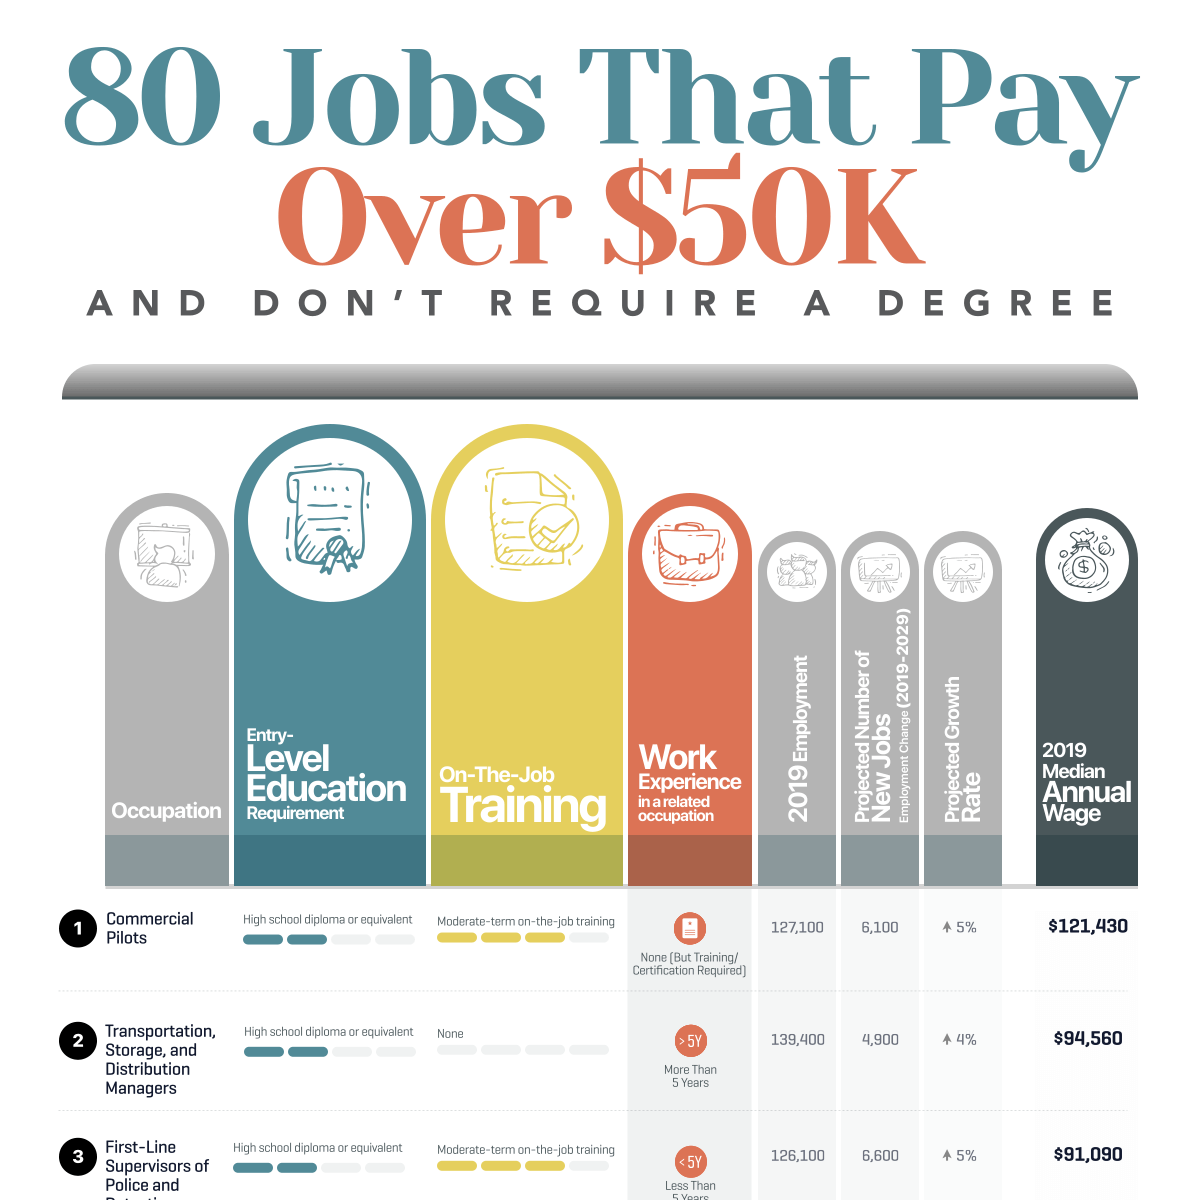 80 Jobs That Pay Over $50K and Don’t Require a Degree